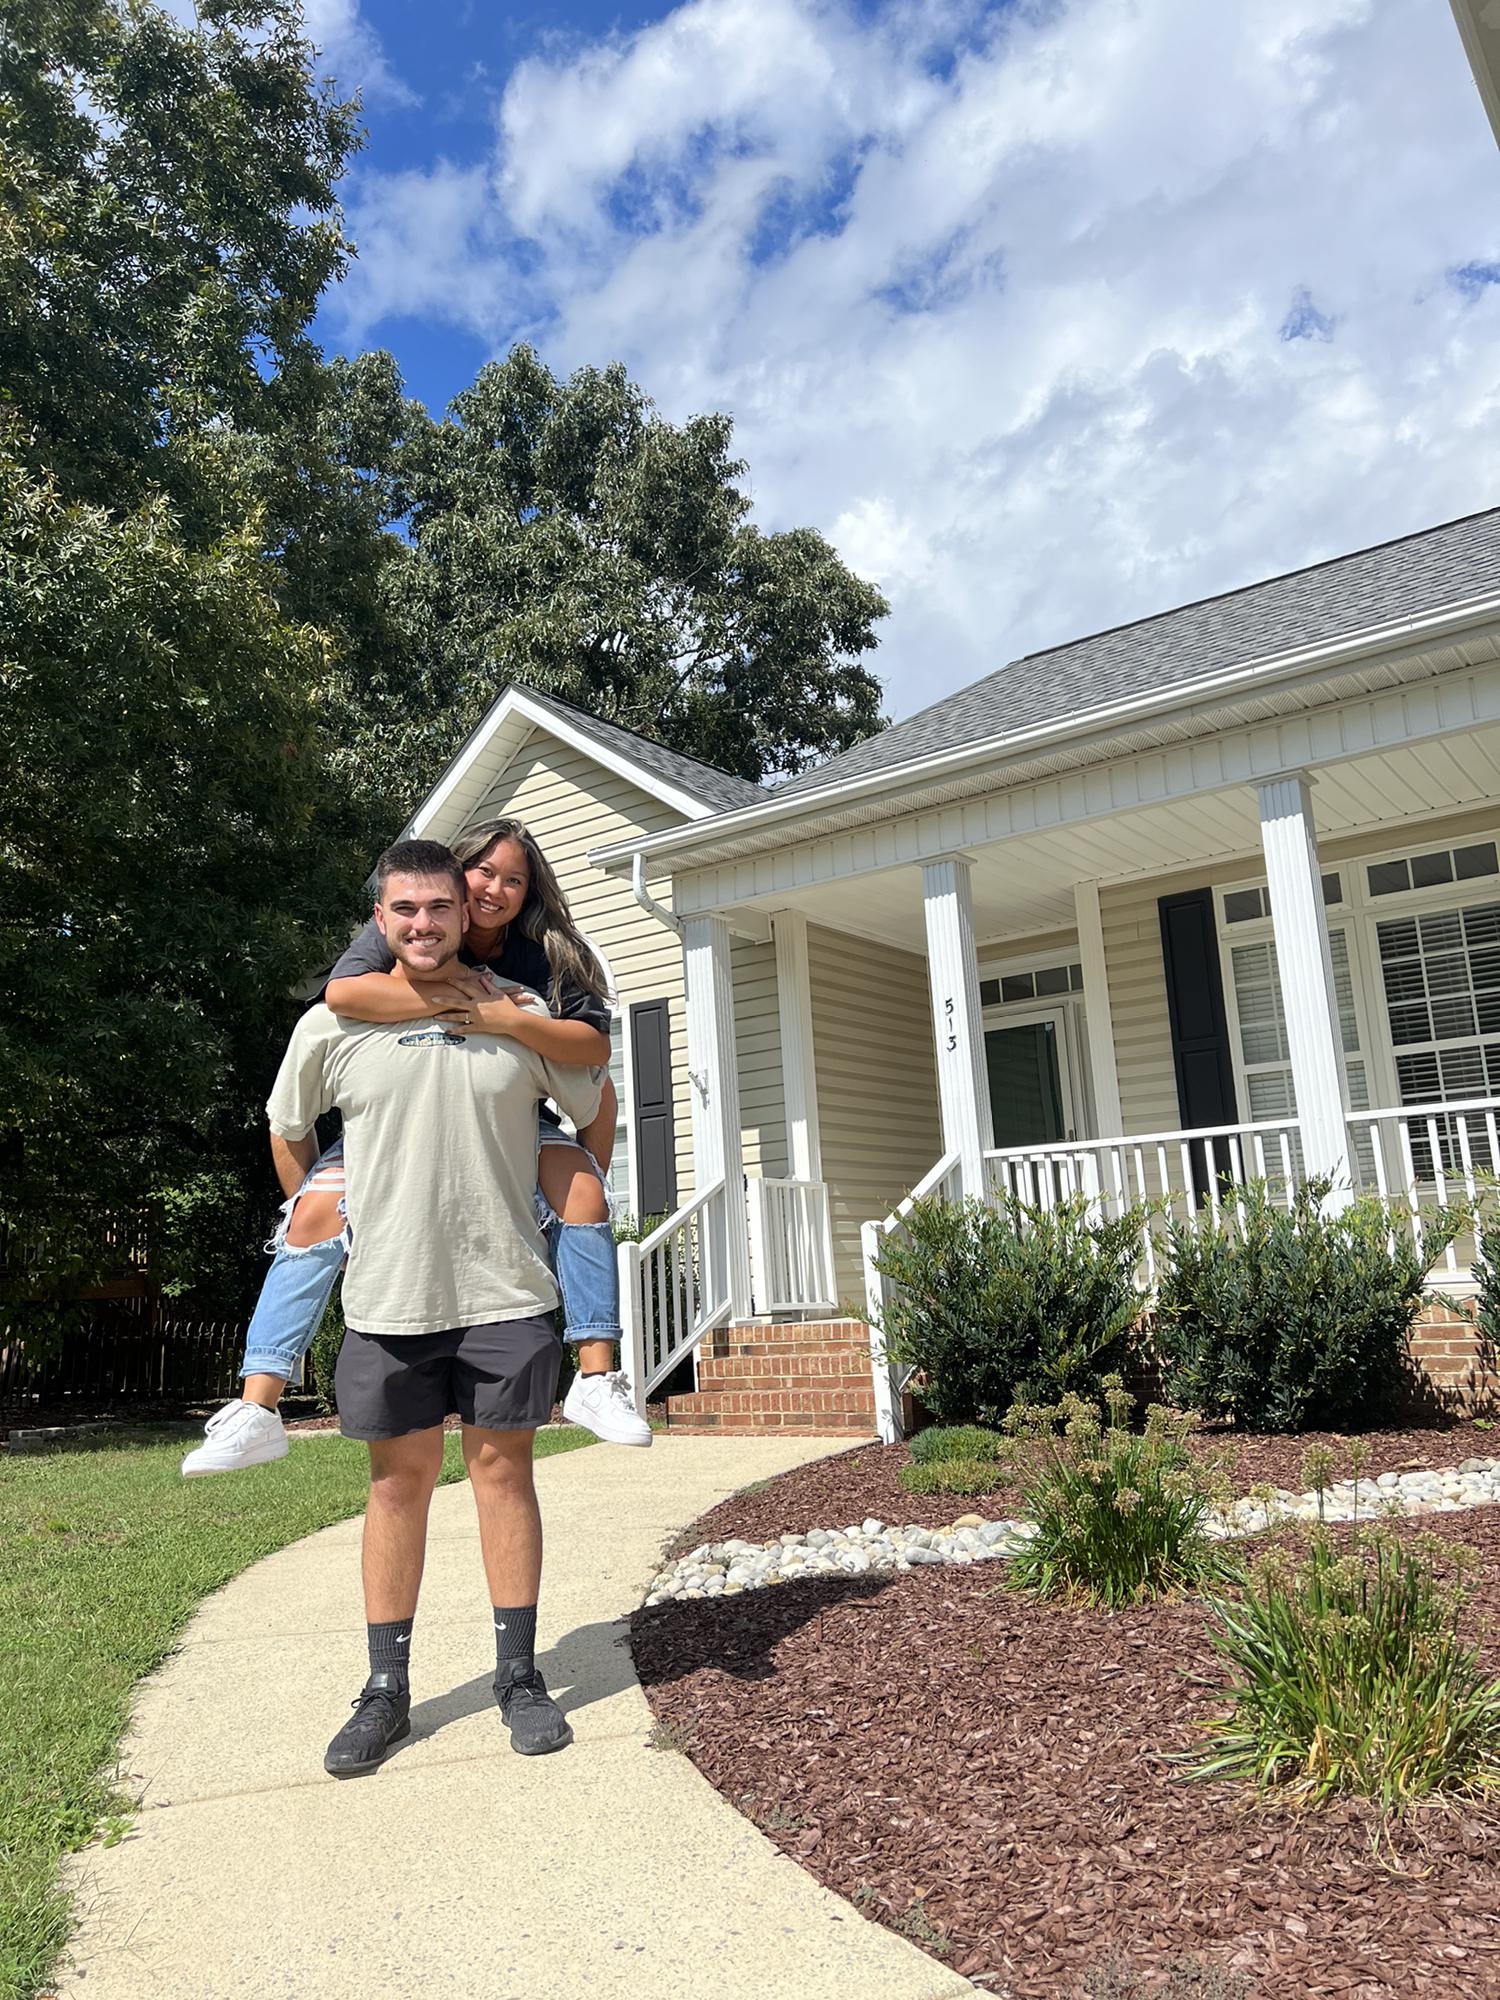 We bought our first home during the Summer of 2022! The sweetest milestone.